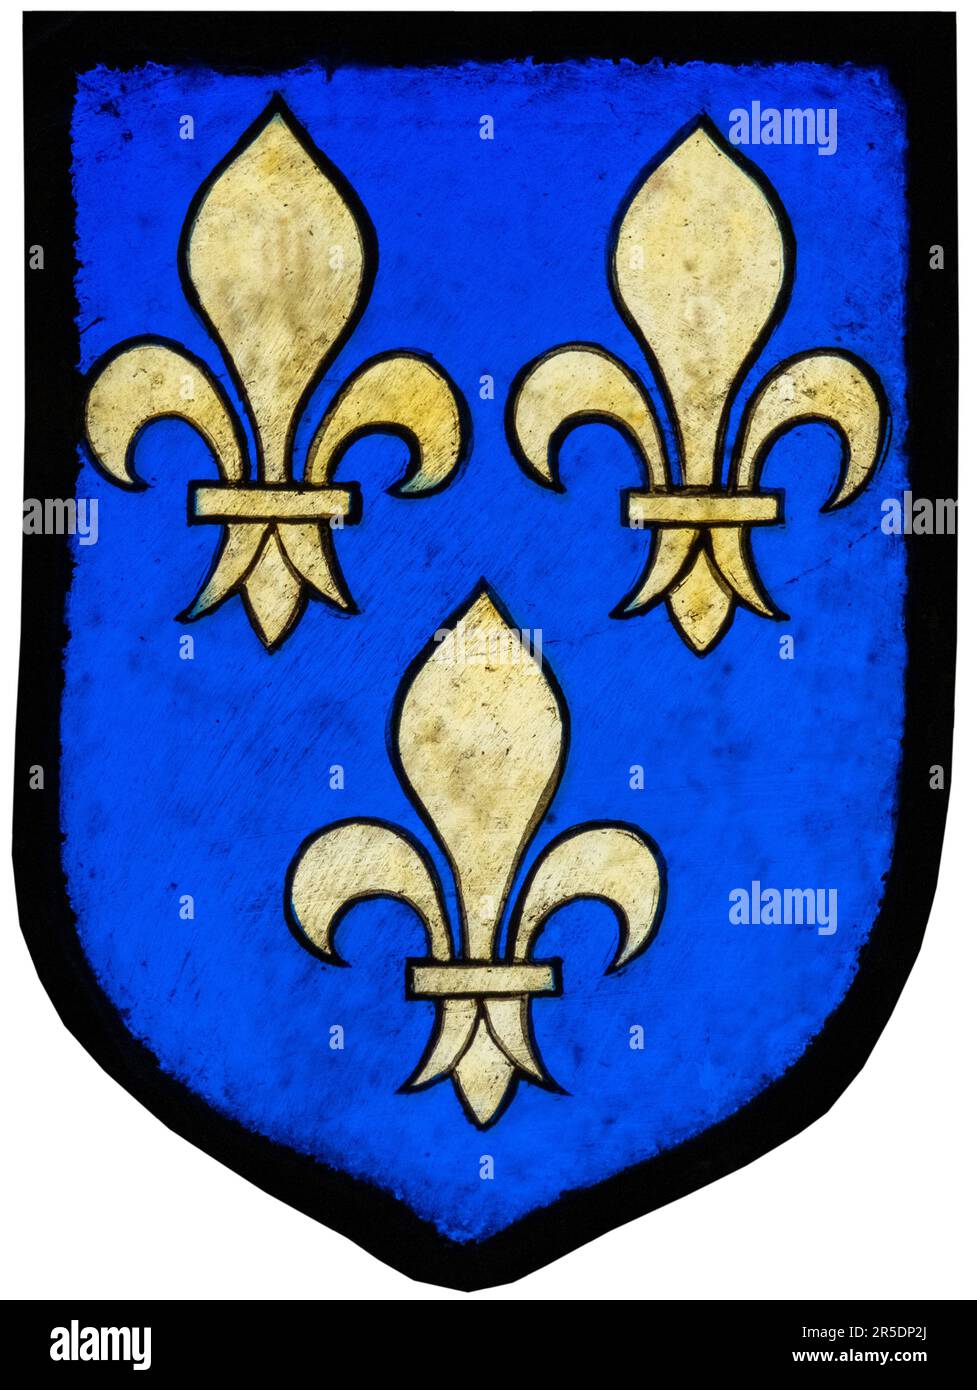 Kingdom of France French Coat of Arms with Fleurs de Lys Vintage